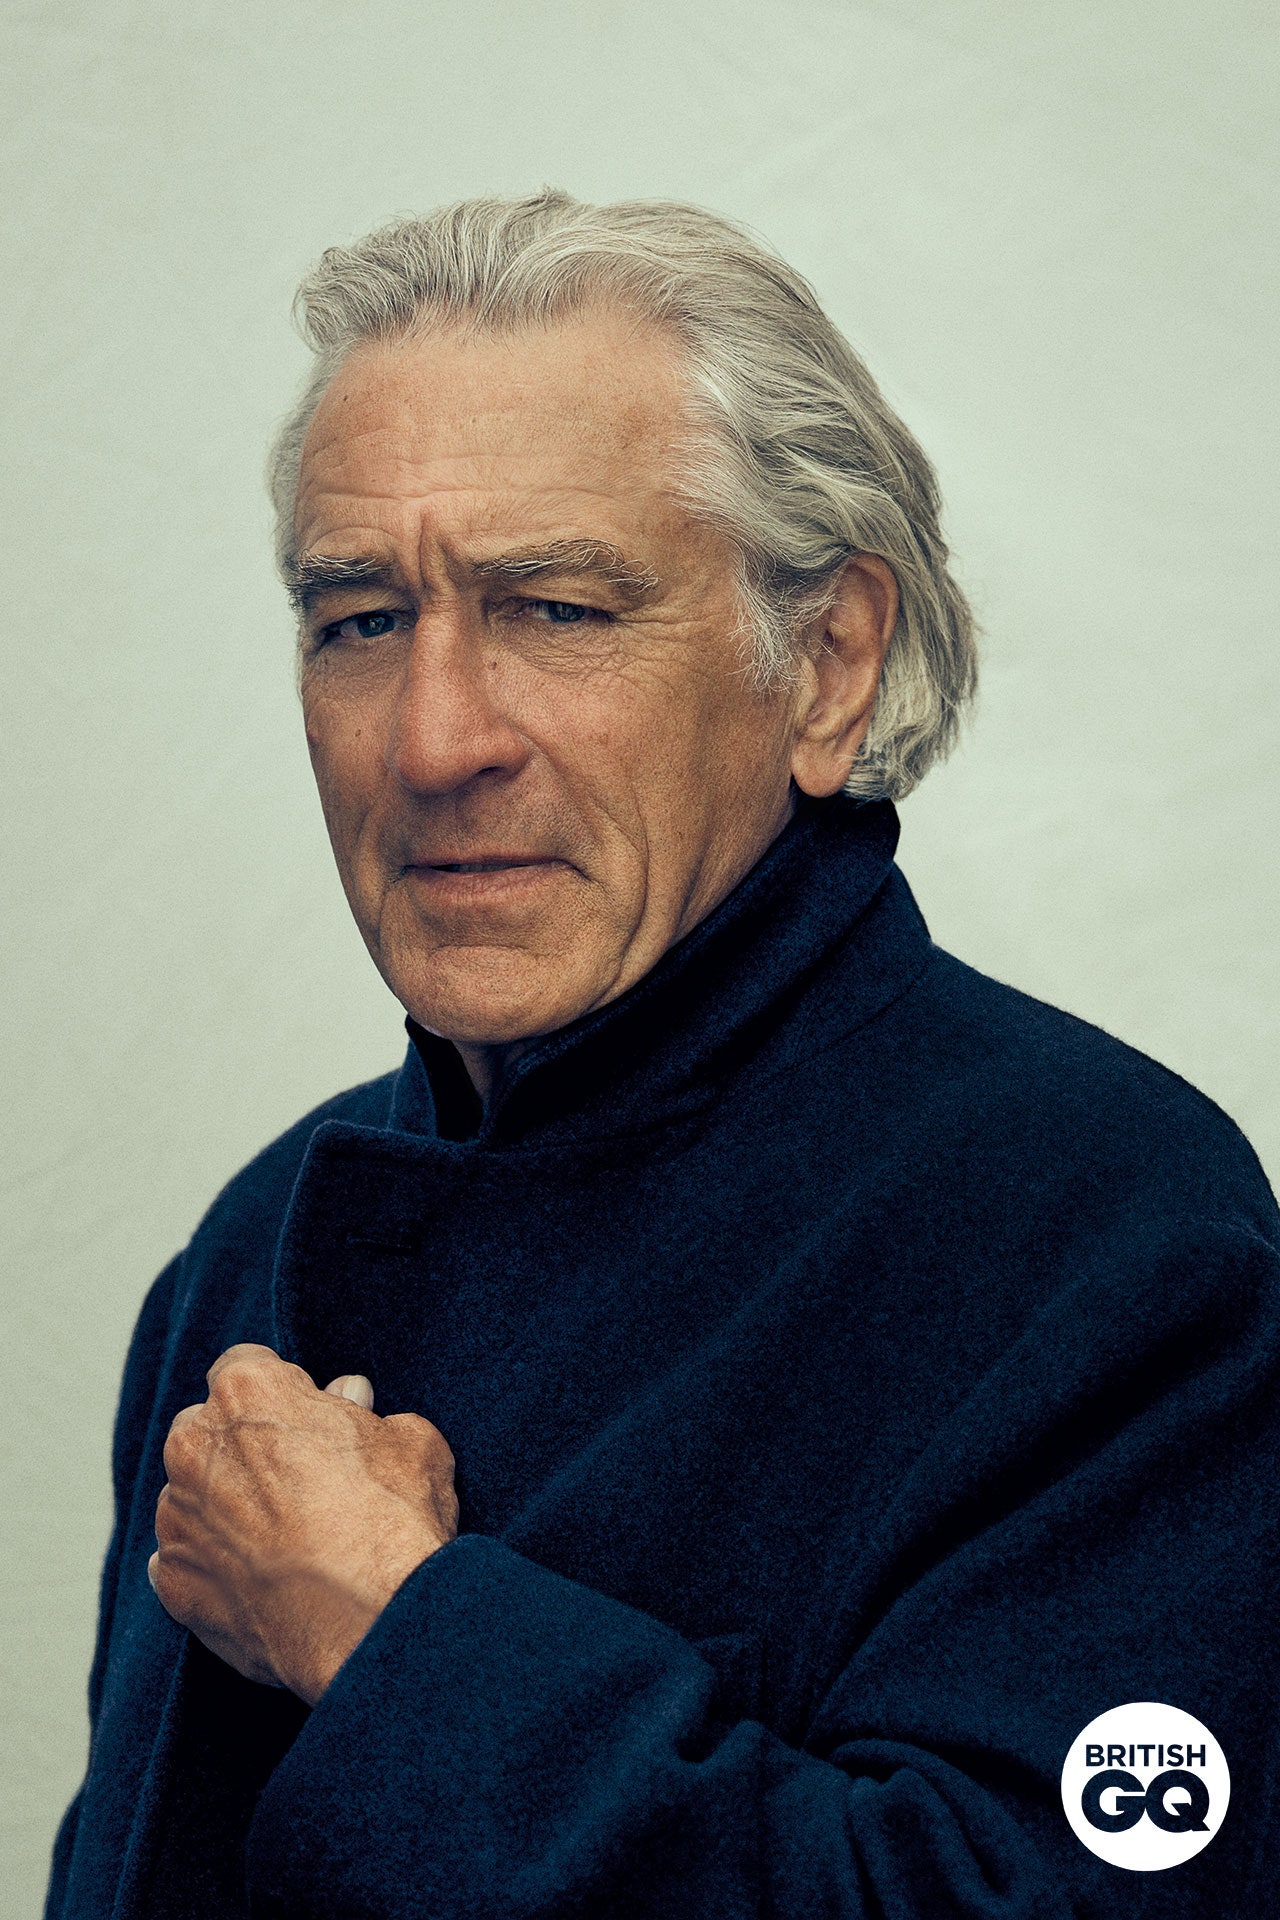 robert De Niro Interview Trump Is A Lowlife Hes Going To Ruin This Country British Gq